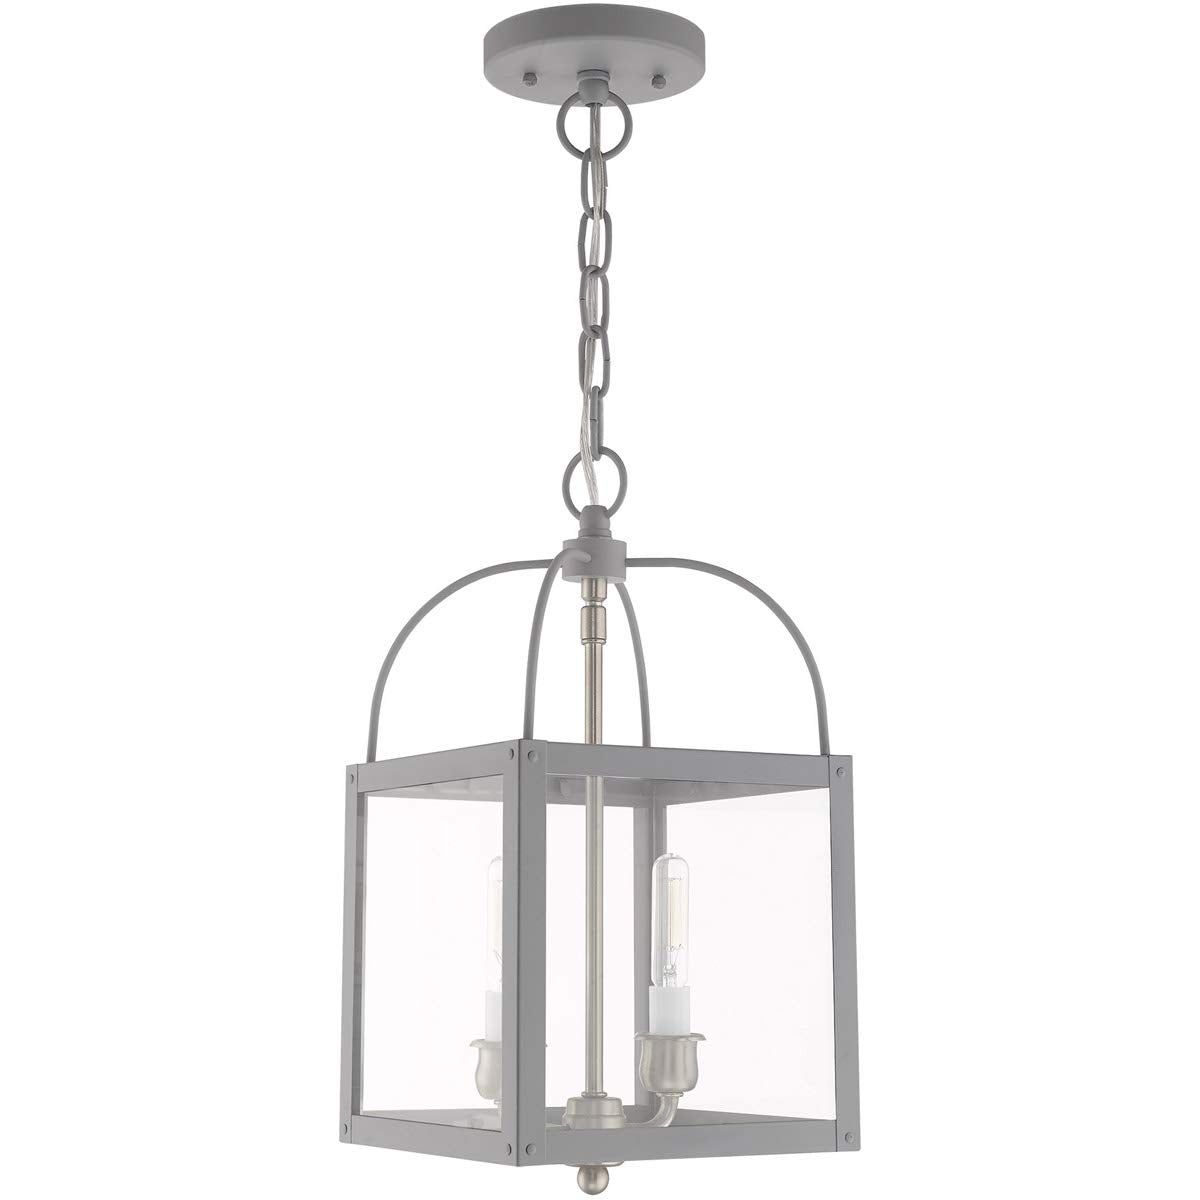 Livex Lighting 4041-80 Milford - Two Light Convertible Mini Pendant, Nordic Gray Finish with Clear Glass